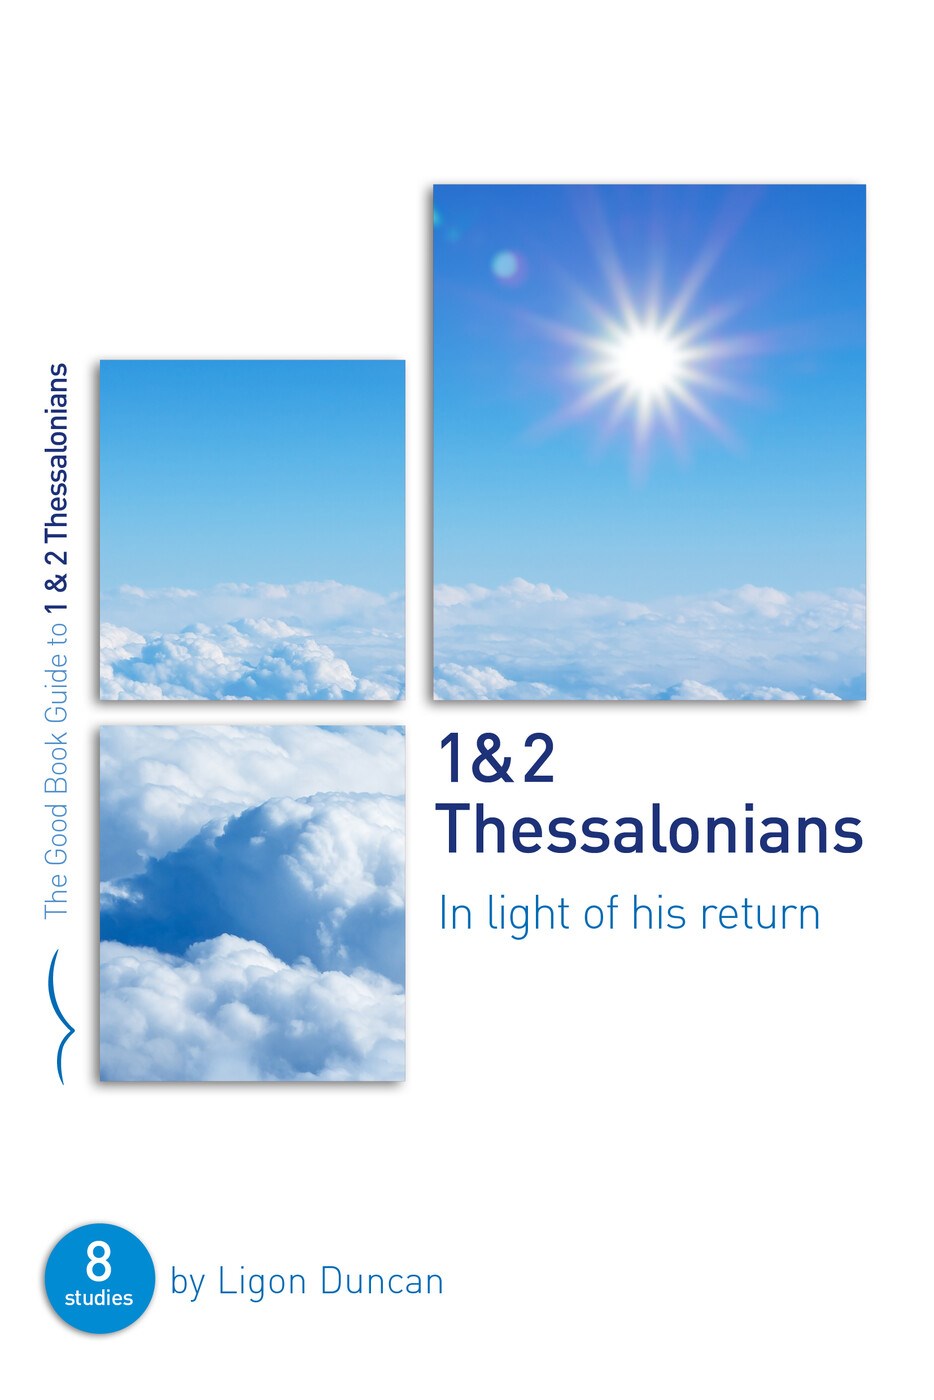 1 & 2 Thessalonians: In Light of His Return